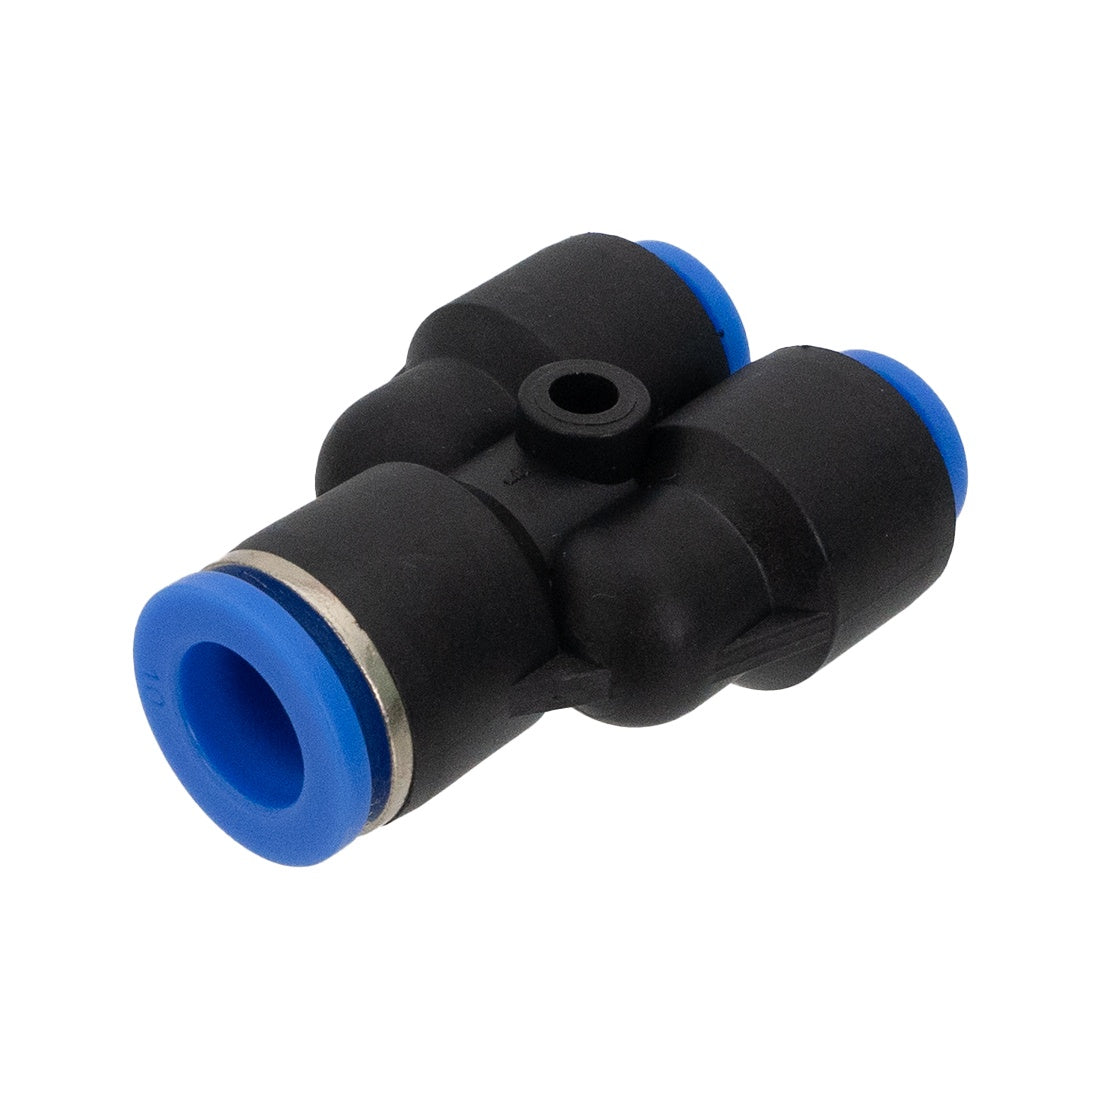 XERO Push to Fit Y-Fitting Reducer - 3/8 to 5/16 inch Left Angle View